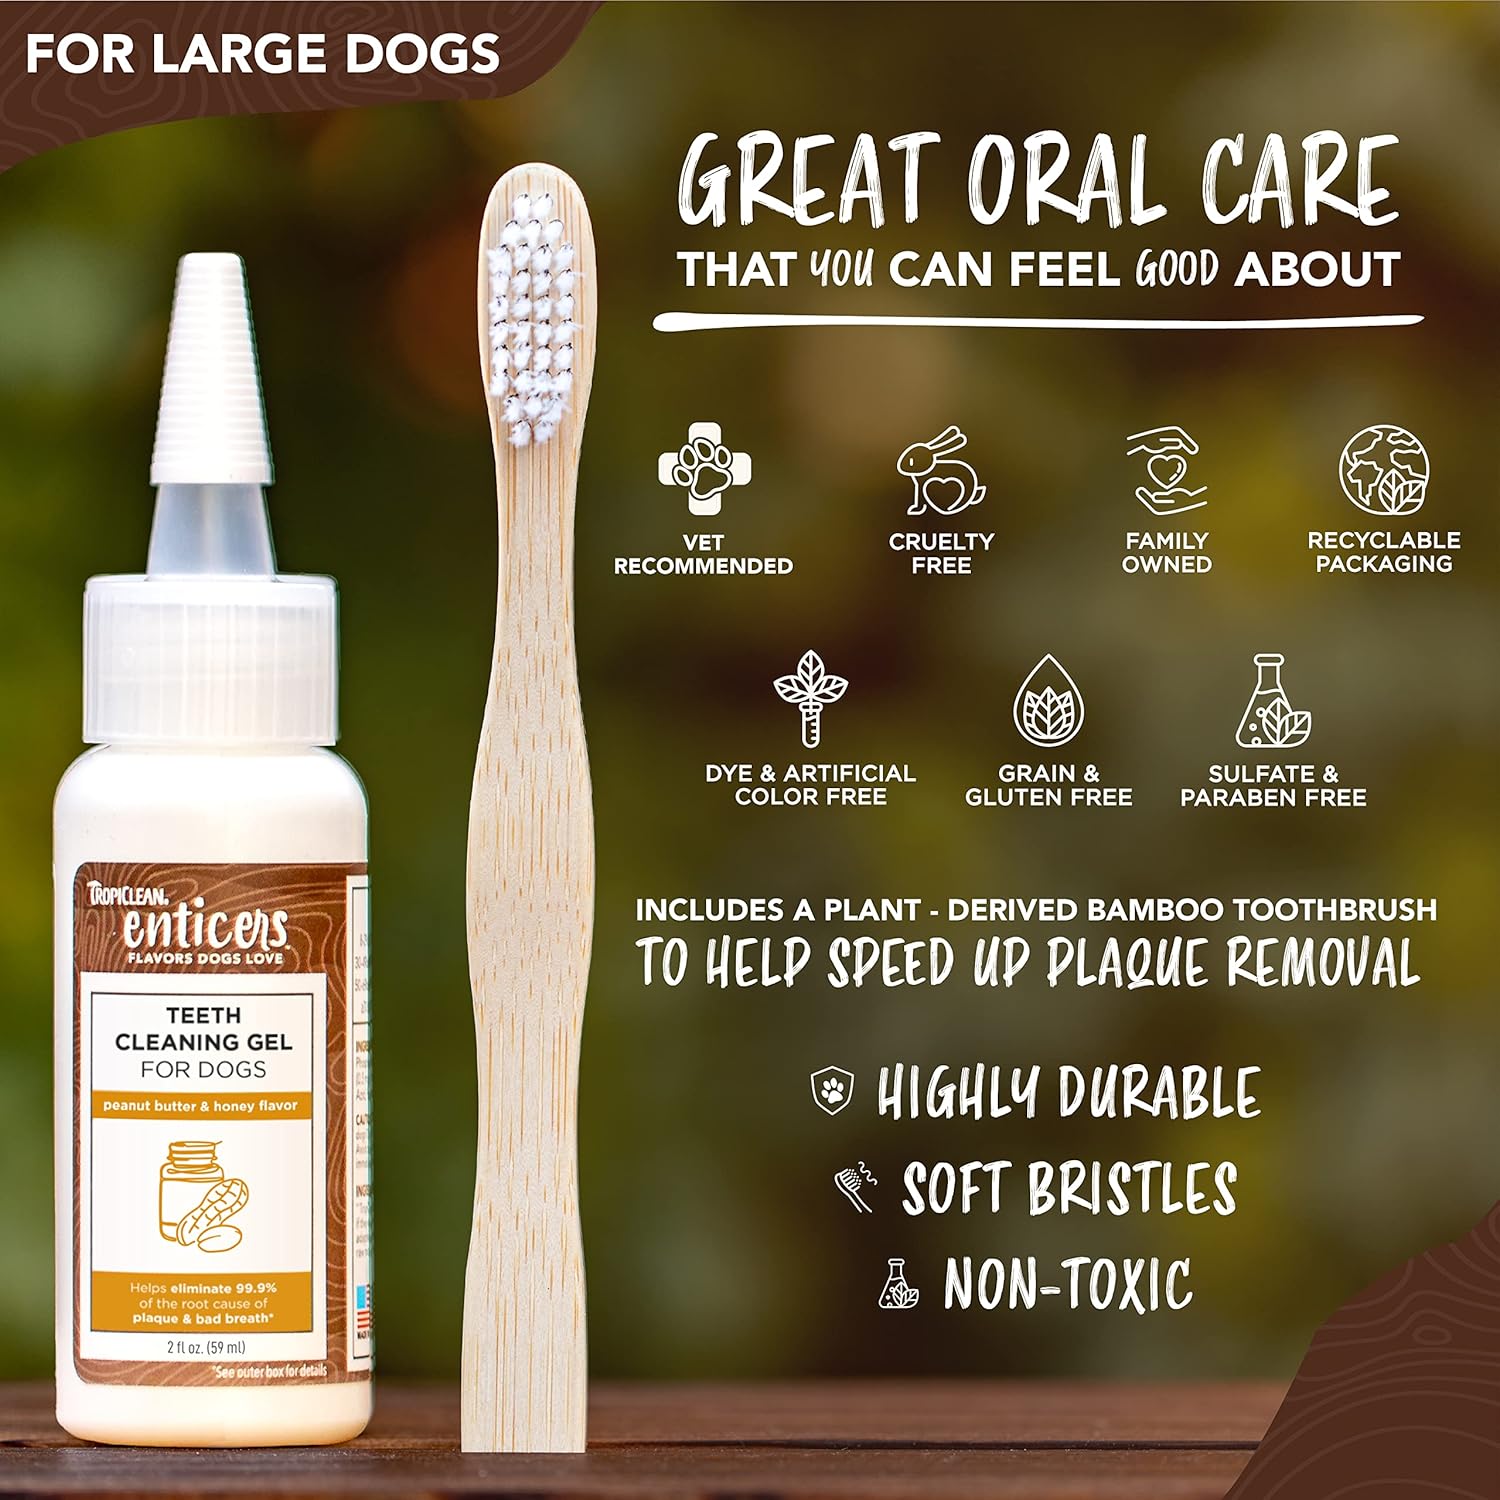 TropiClean Enticers Teeth Cleaning Gel & Toothbrush for Large Dogs - Peanut Butter & Honey Flavour, 59ml - Helps Remove The Source of Bad Breath and Plaque - Bamboo Brush Speeds Up Plaque Removal :Pet Supplies